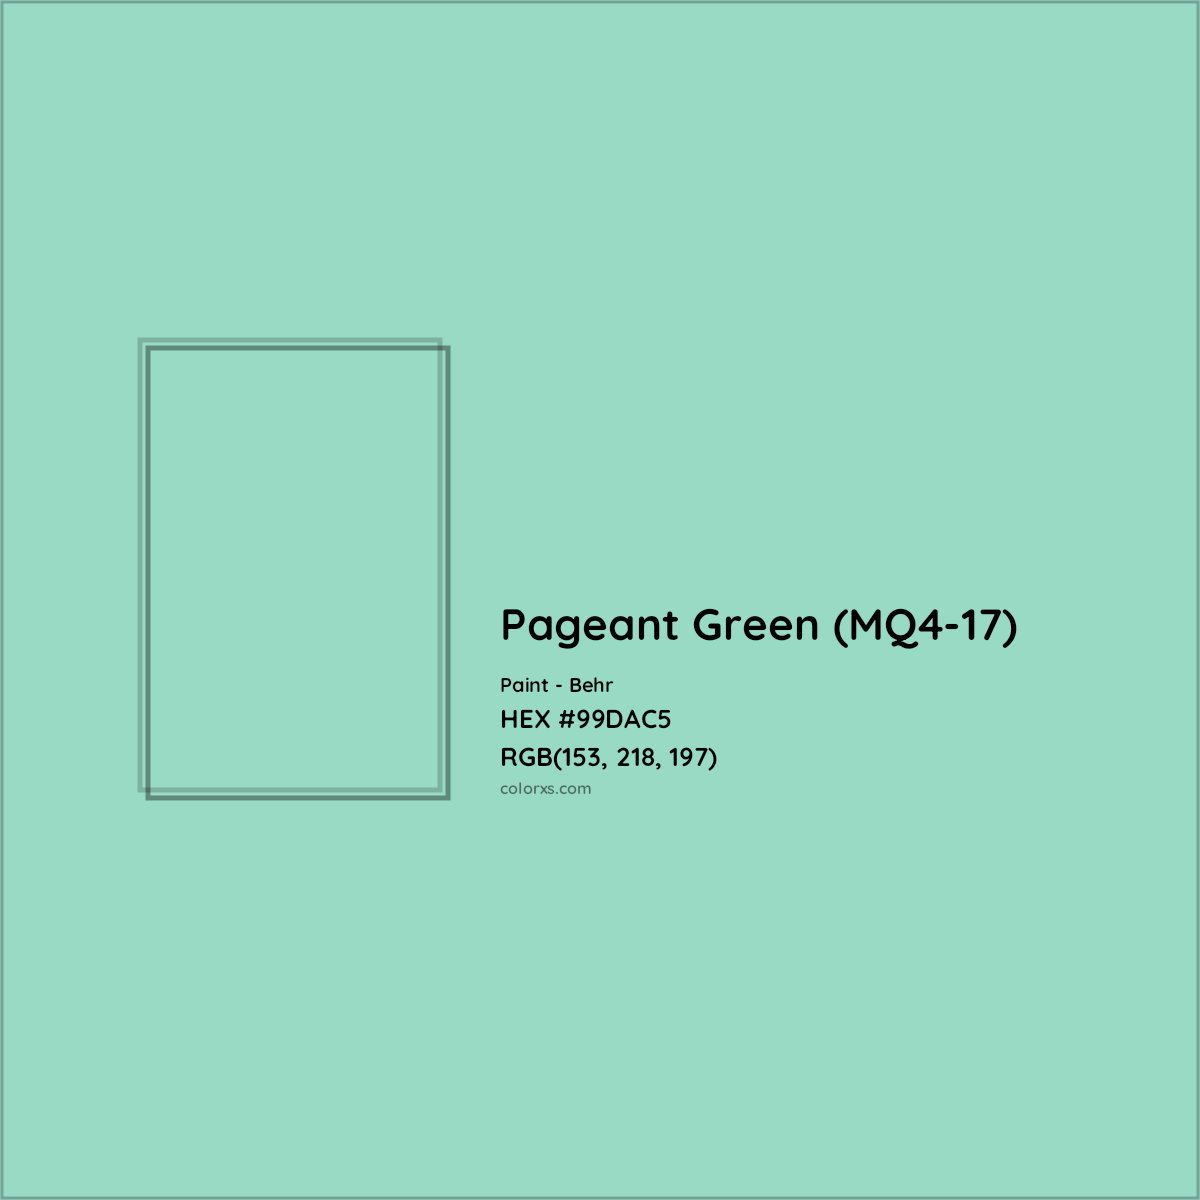 HEX #99DAC5 Pageant Green (MQ4-17) Paint Behr - Color Code